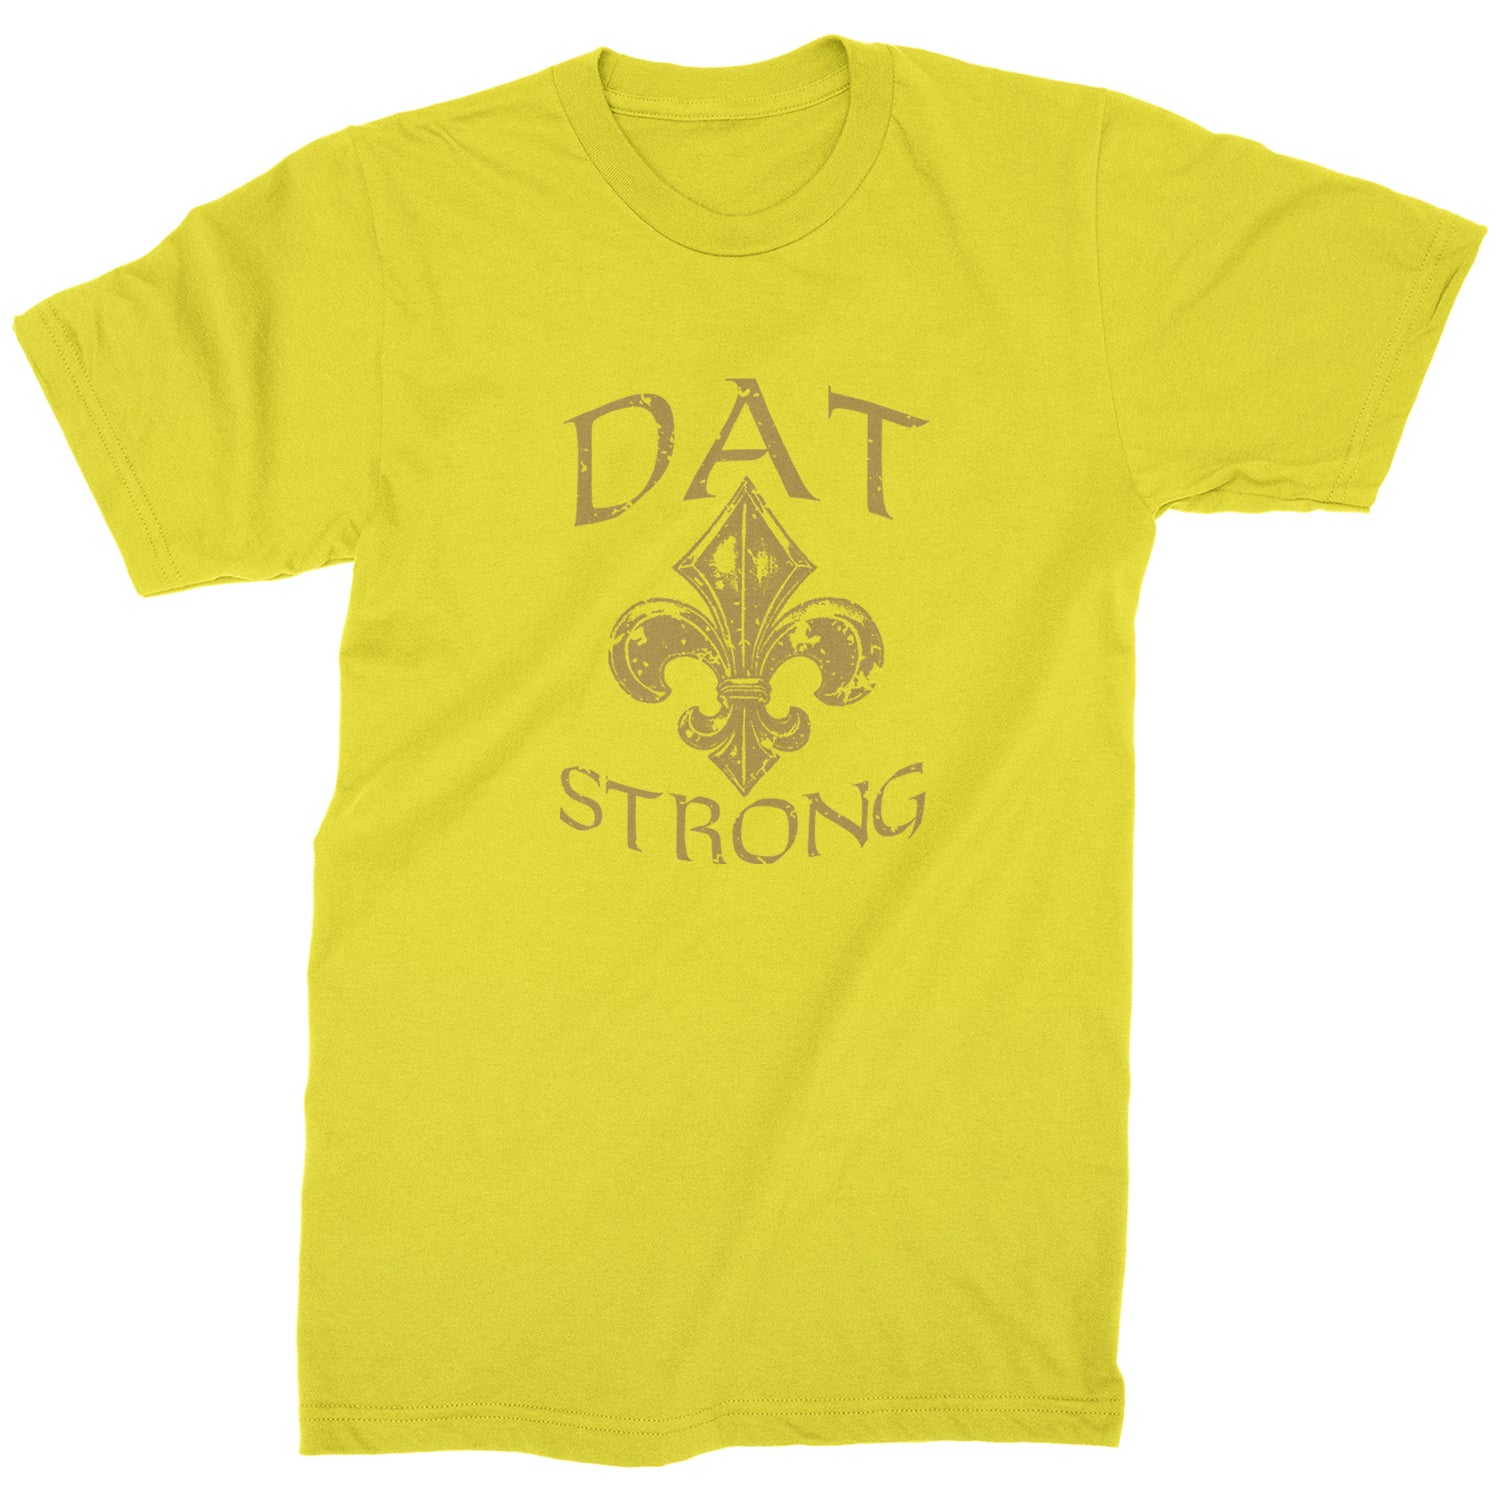 Dat Strong New Orleans Mens T-shirt dat, de, fan, fleur, jersey, lis, new, orleans, sports, strong, who by Expression Tees